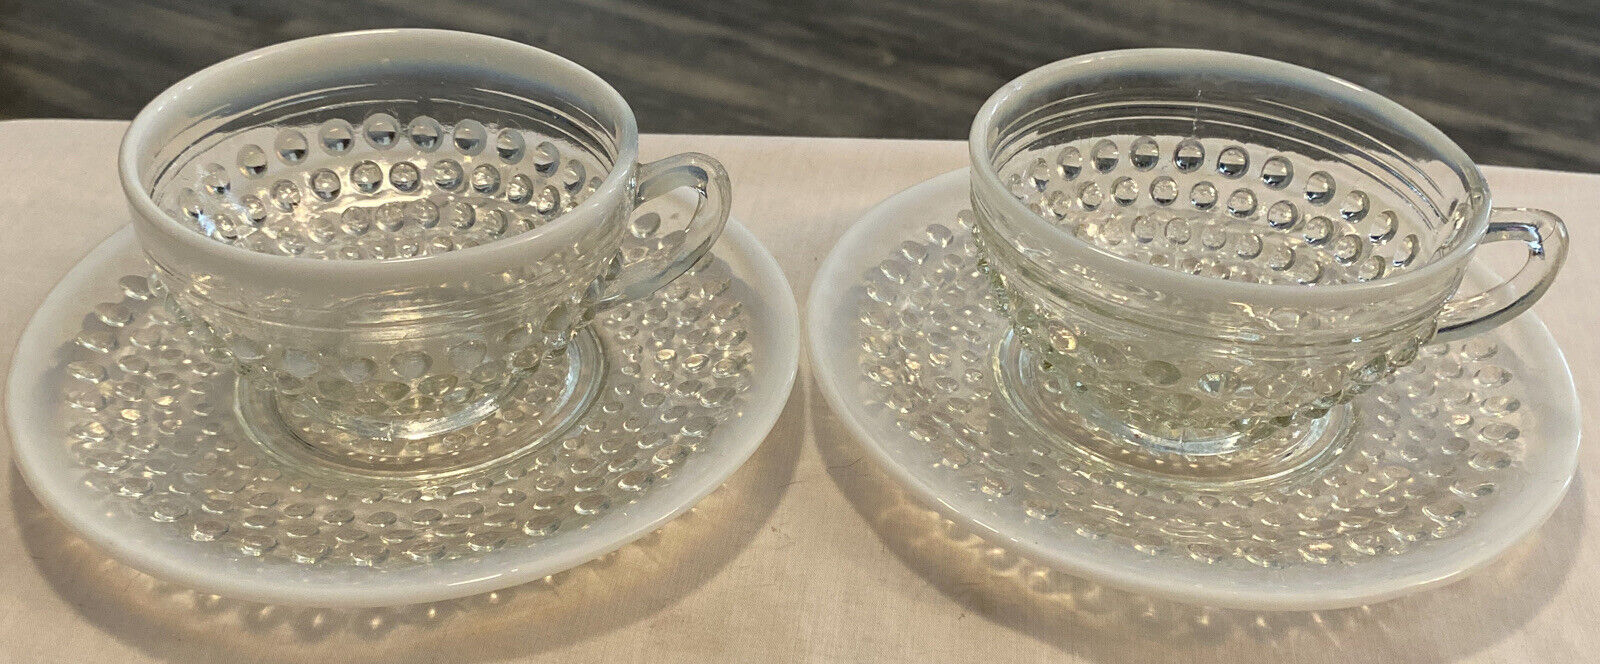 Set Of 2 Moonstone Hobnail Anchor Hocking Opalescent Cup and Saucer Sets